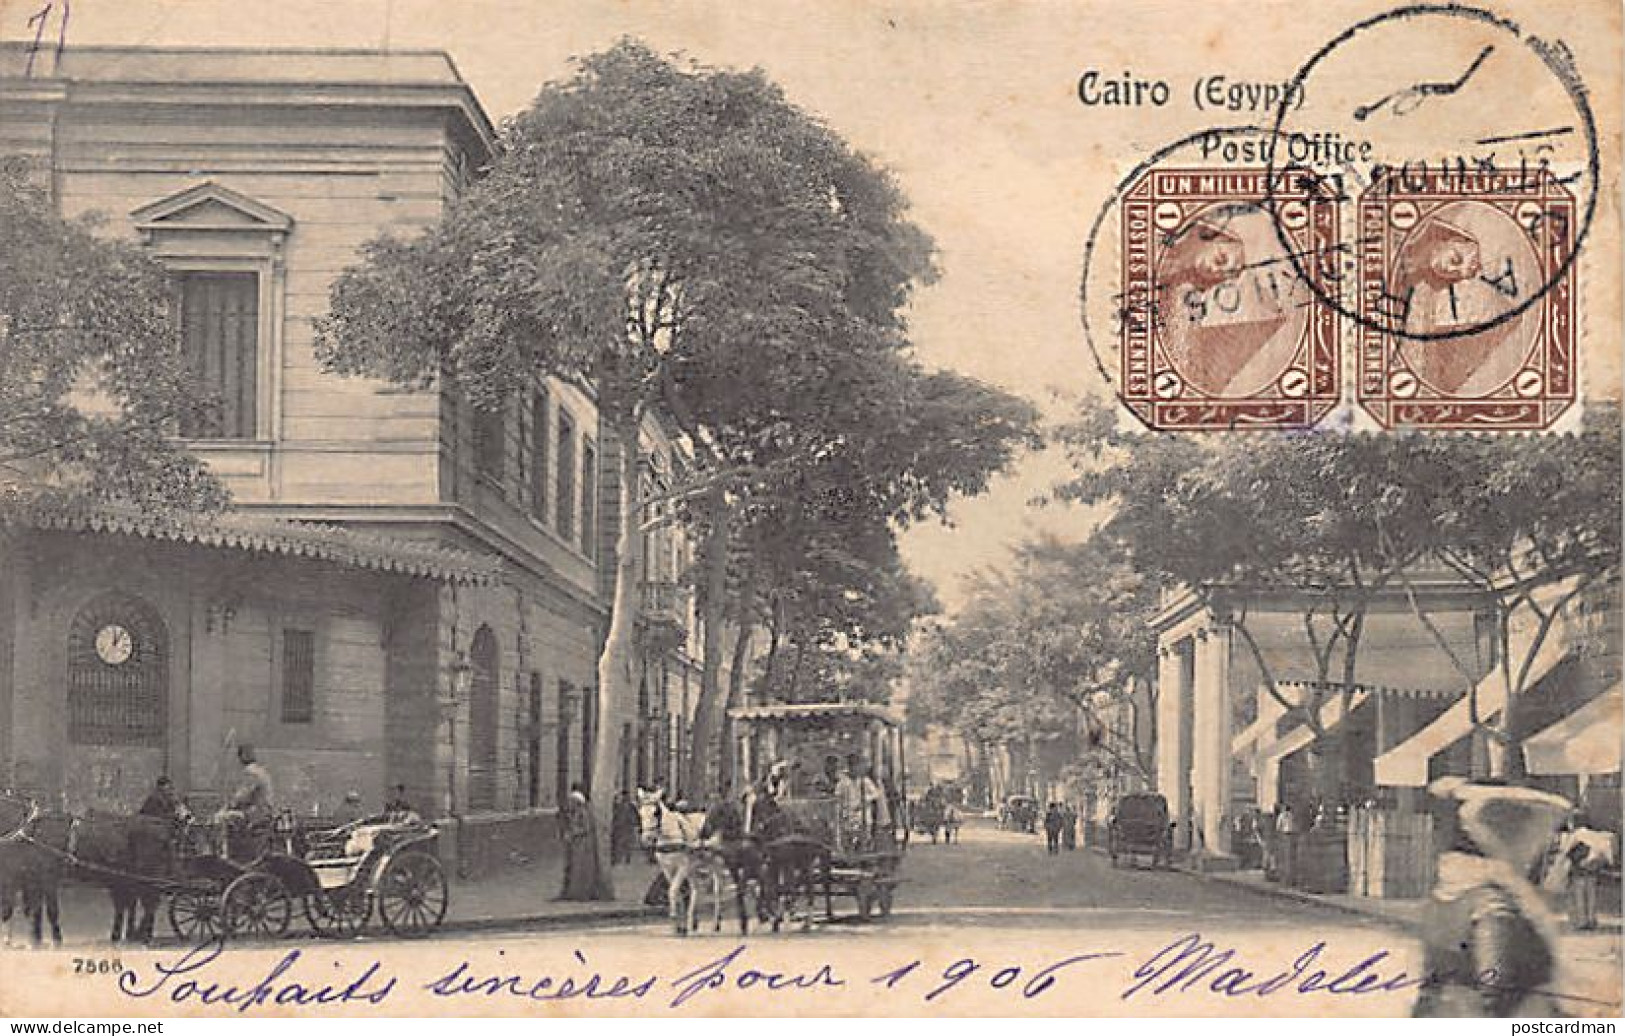 Egypt - CAIRO - Post Office - Publ. Unknown  - Cairo